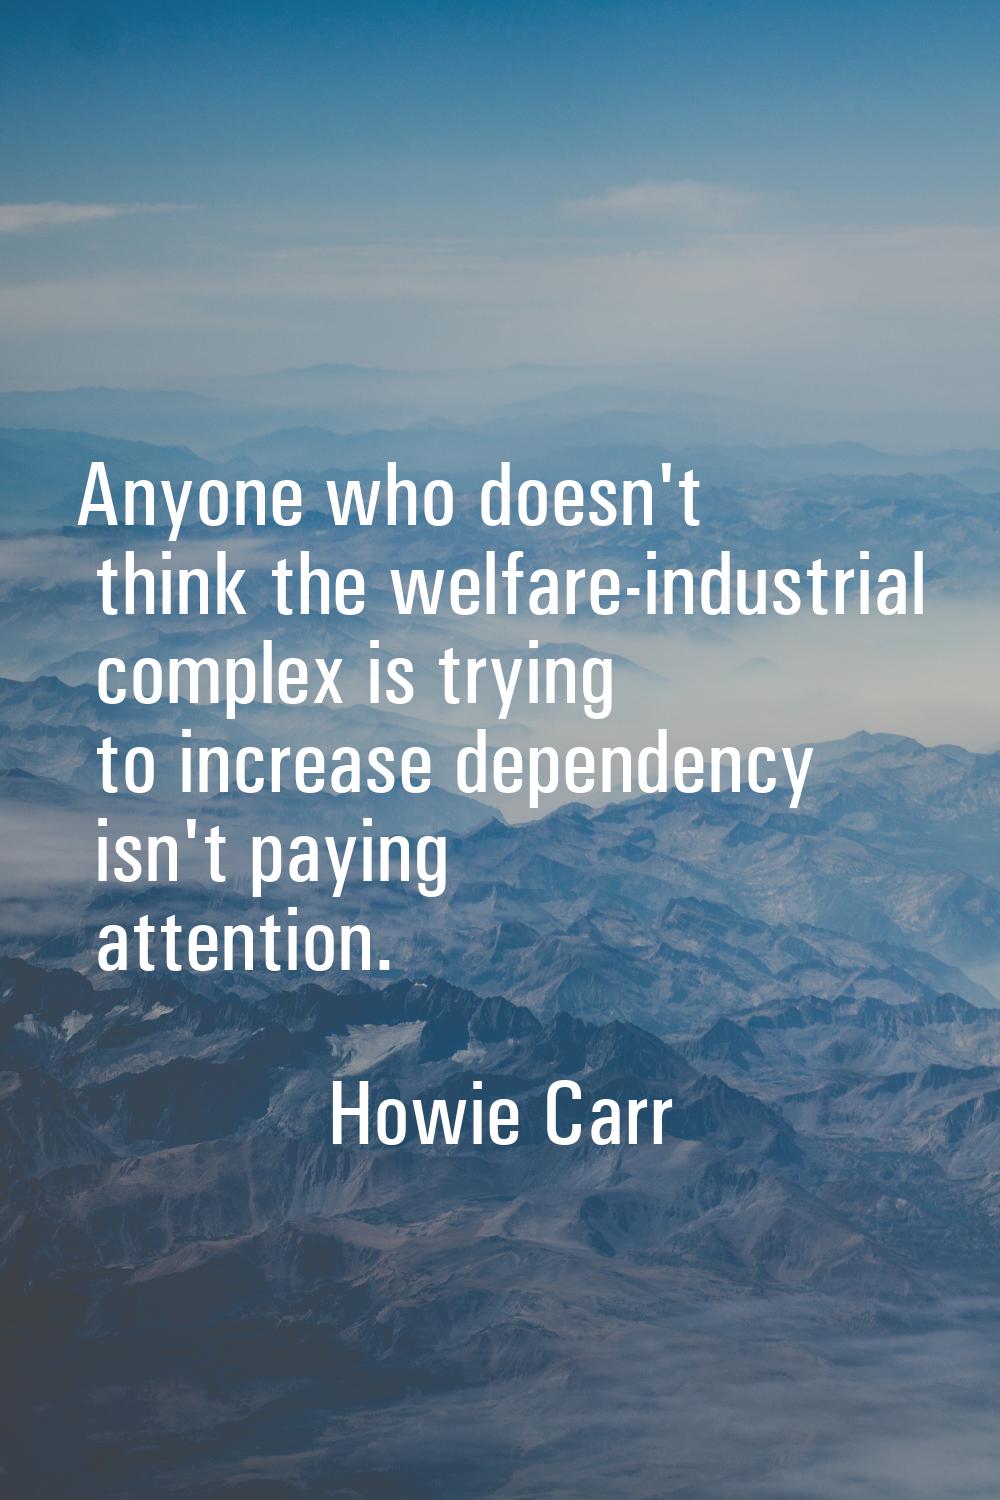 Anyone who doesn't think the welfare-industrial complex is trying to increase dependency isn't payi